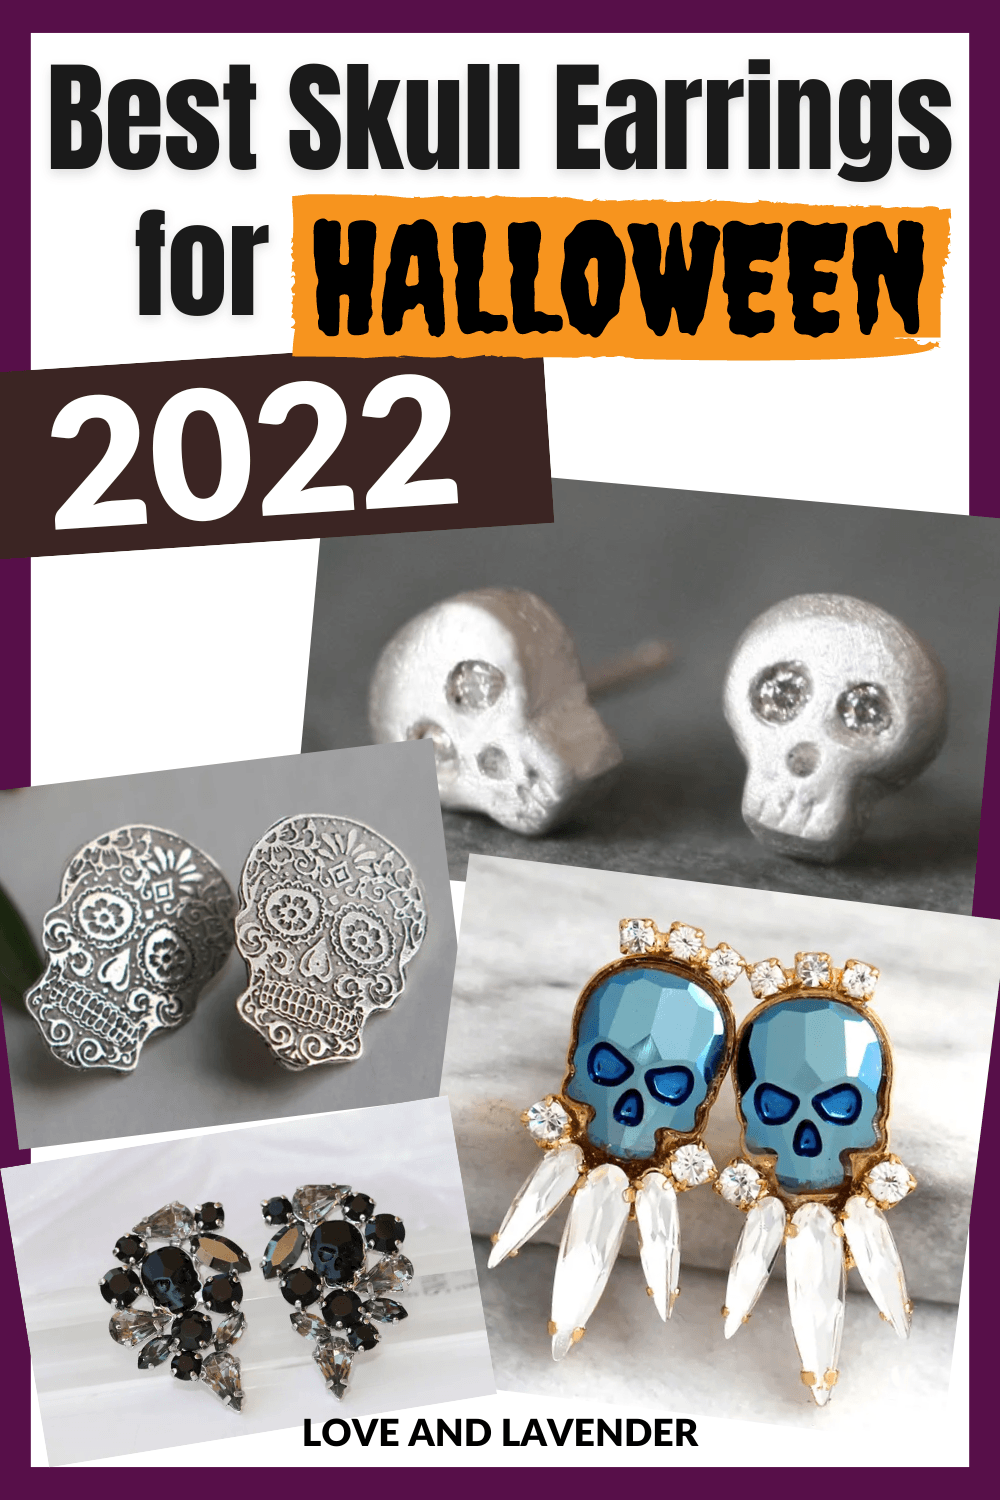 You'll look cool as hell when you pair these badass skull earrings with your outfit. These earrings are the most popular pieces of our collection and come in a variety of colors to match all your outfits